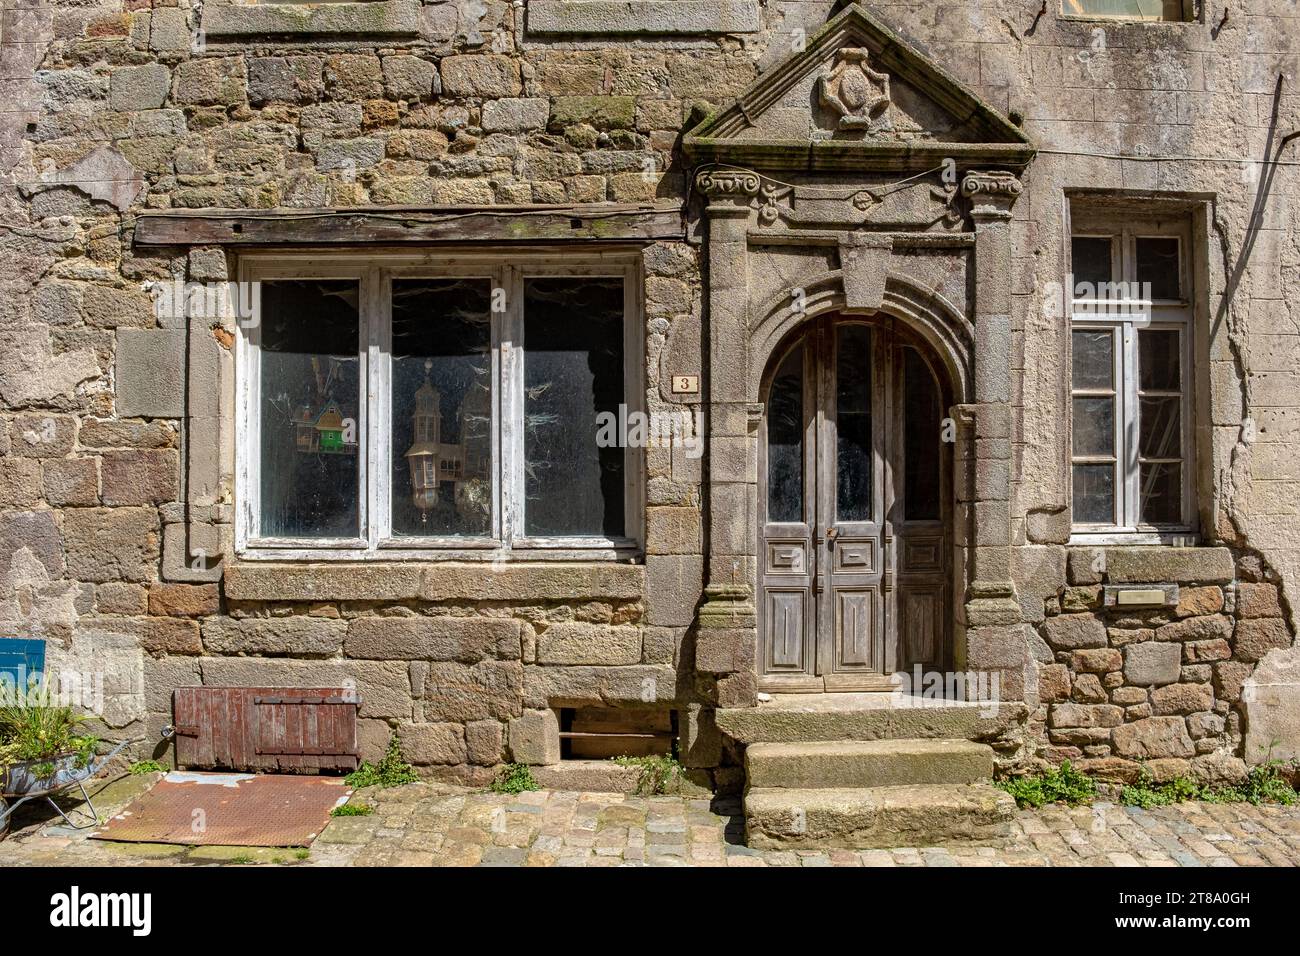 The renaissance entrance of a house in Moncontour, Brittany, France, taken on a sunny summer day with no people Stock Photo